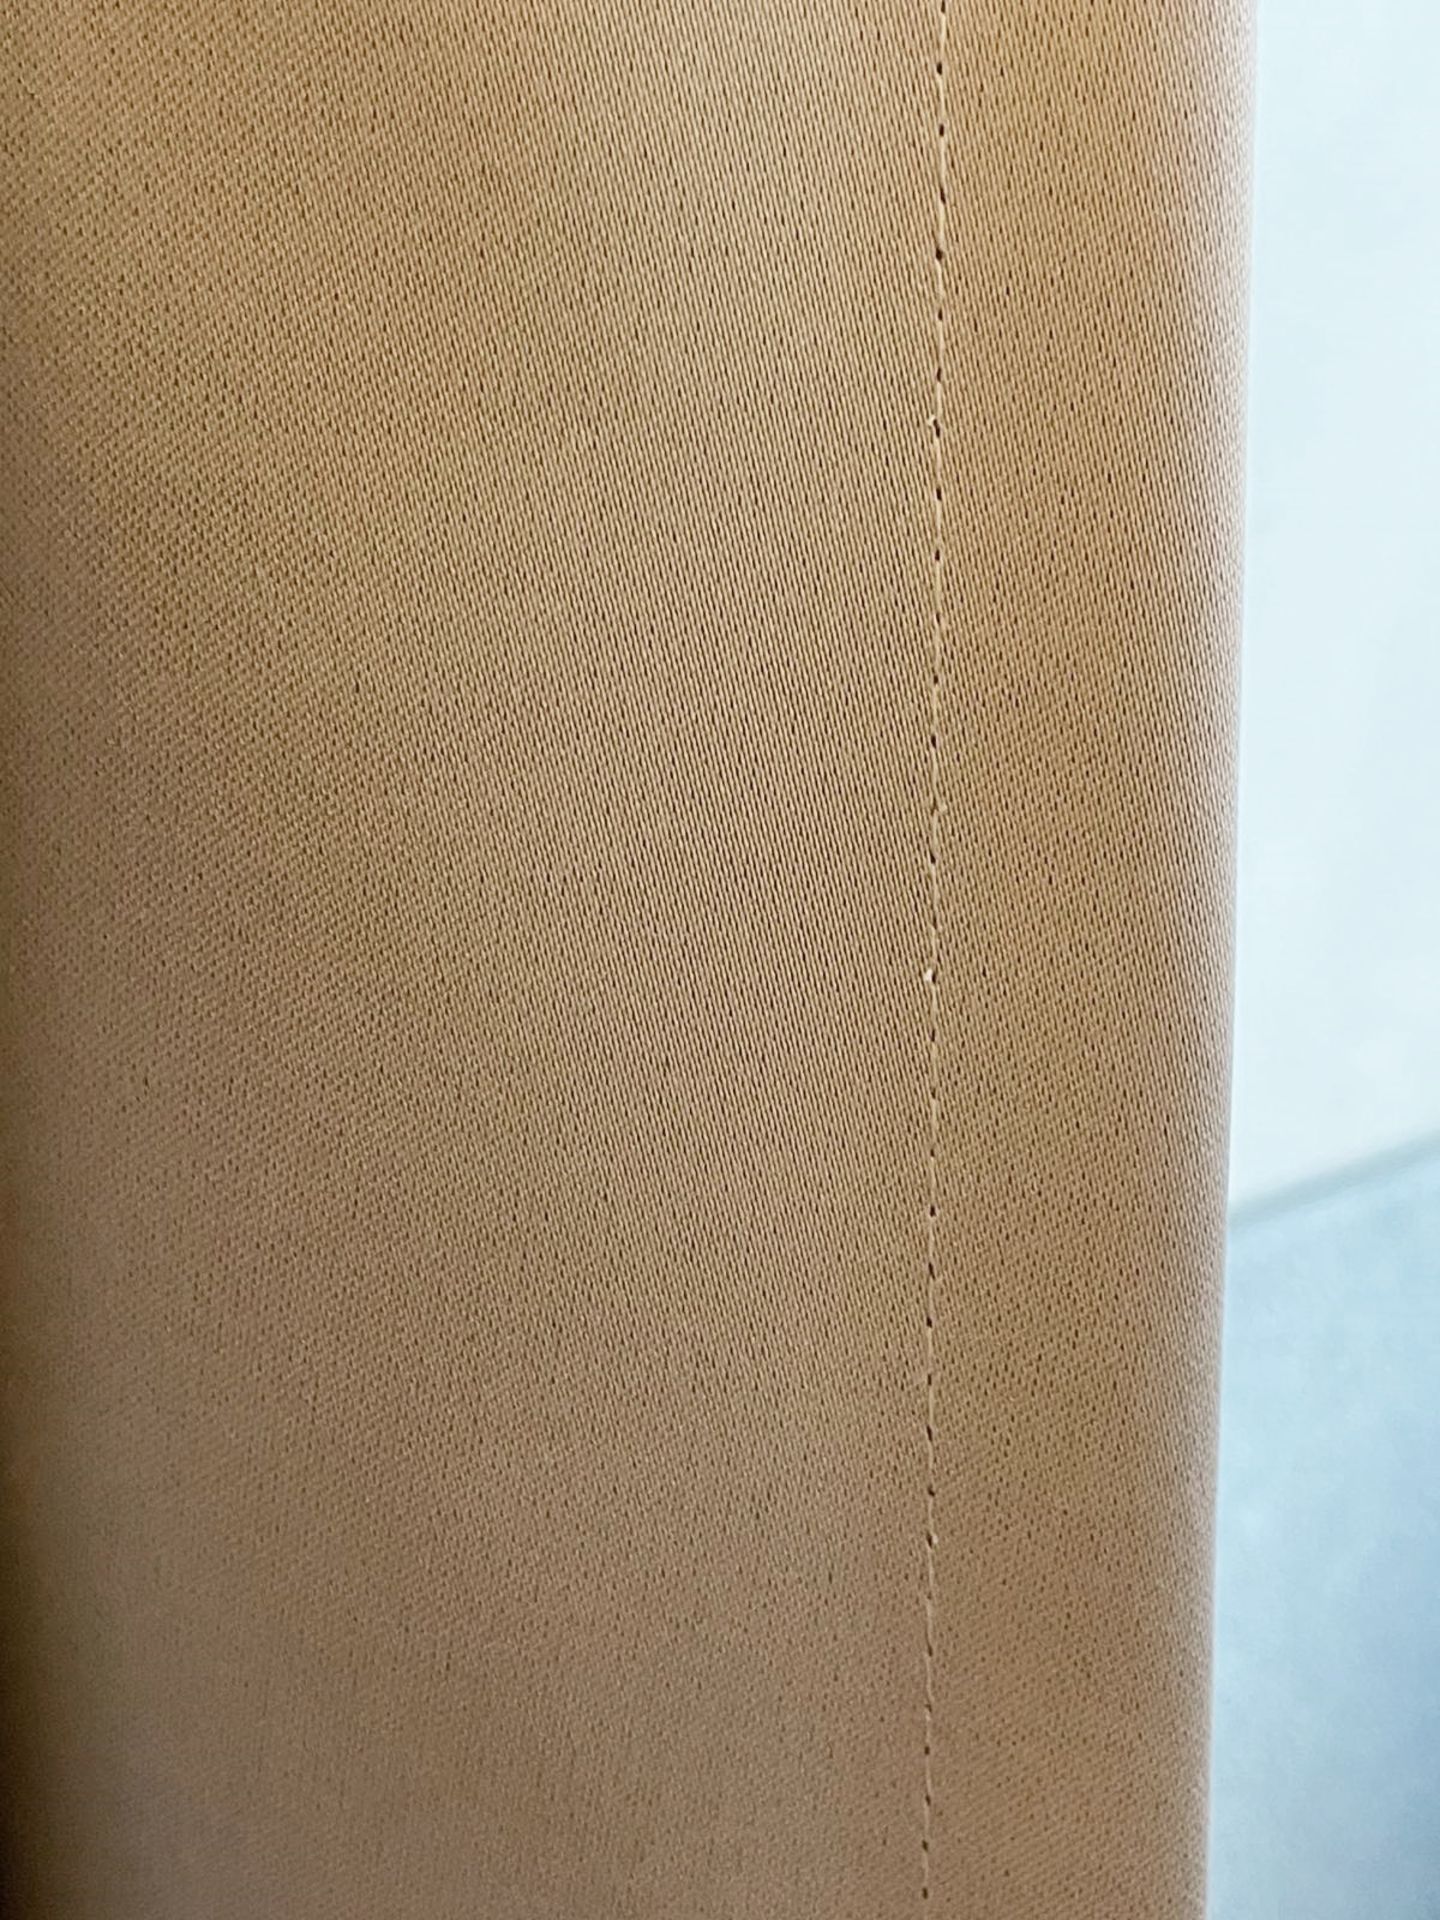 1 x Luxury Lined Bedroom Curtain in a Neutral Tone - CL894  - Ref: BED2 - NO VAT ON THE HAMMER - Image 5 of 10